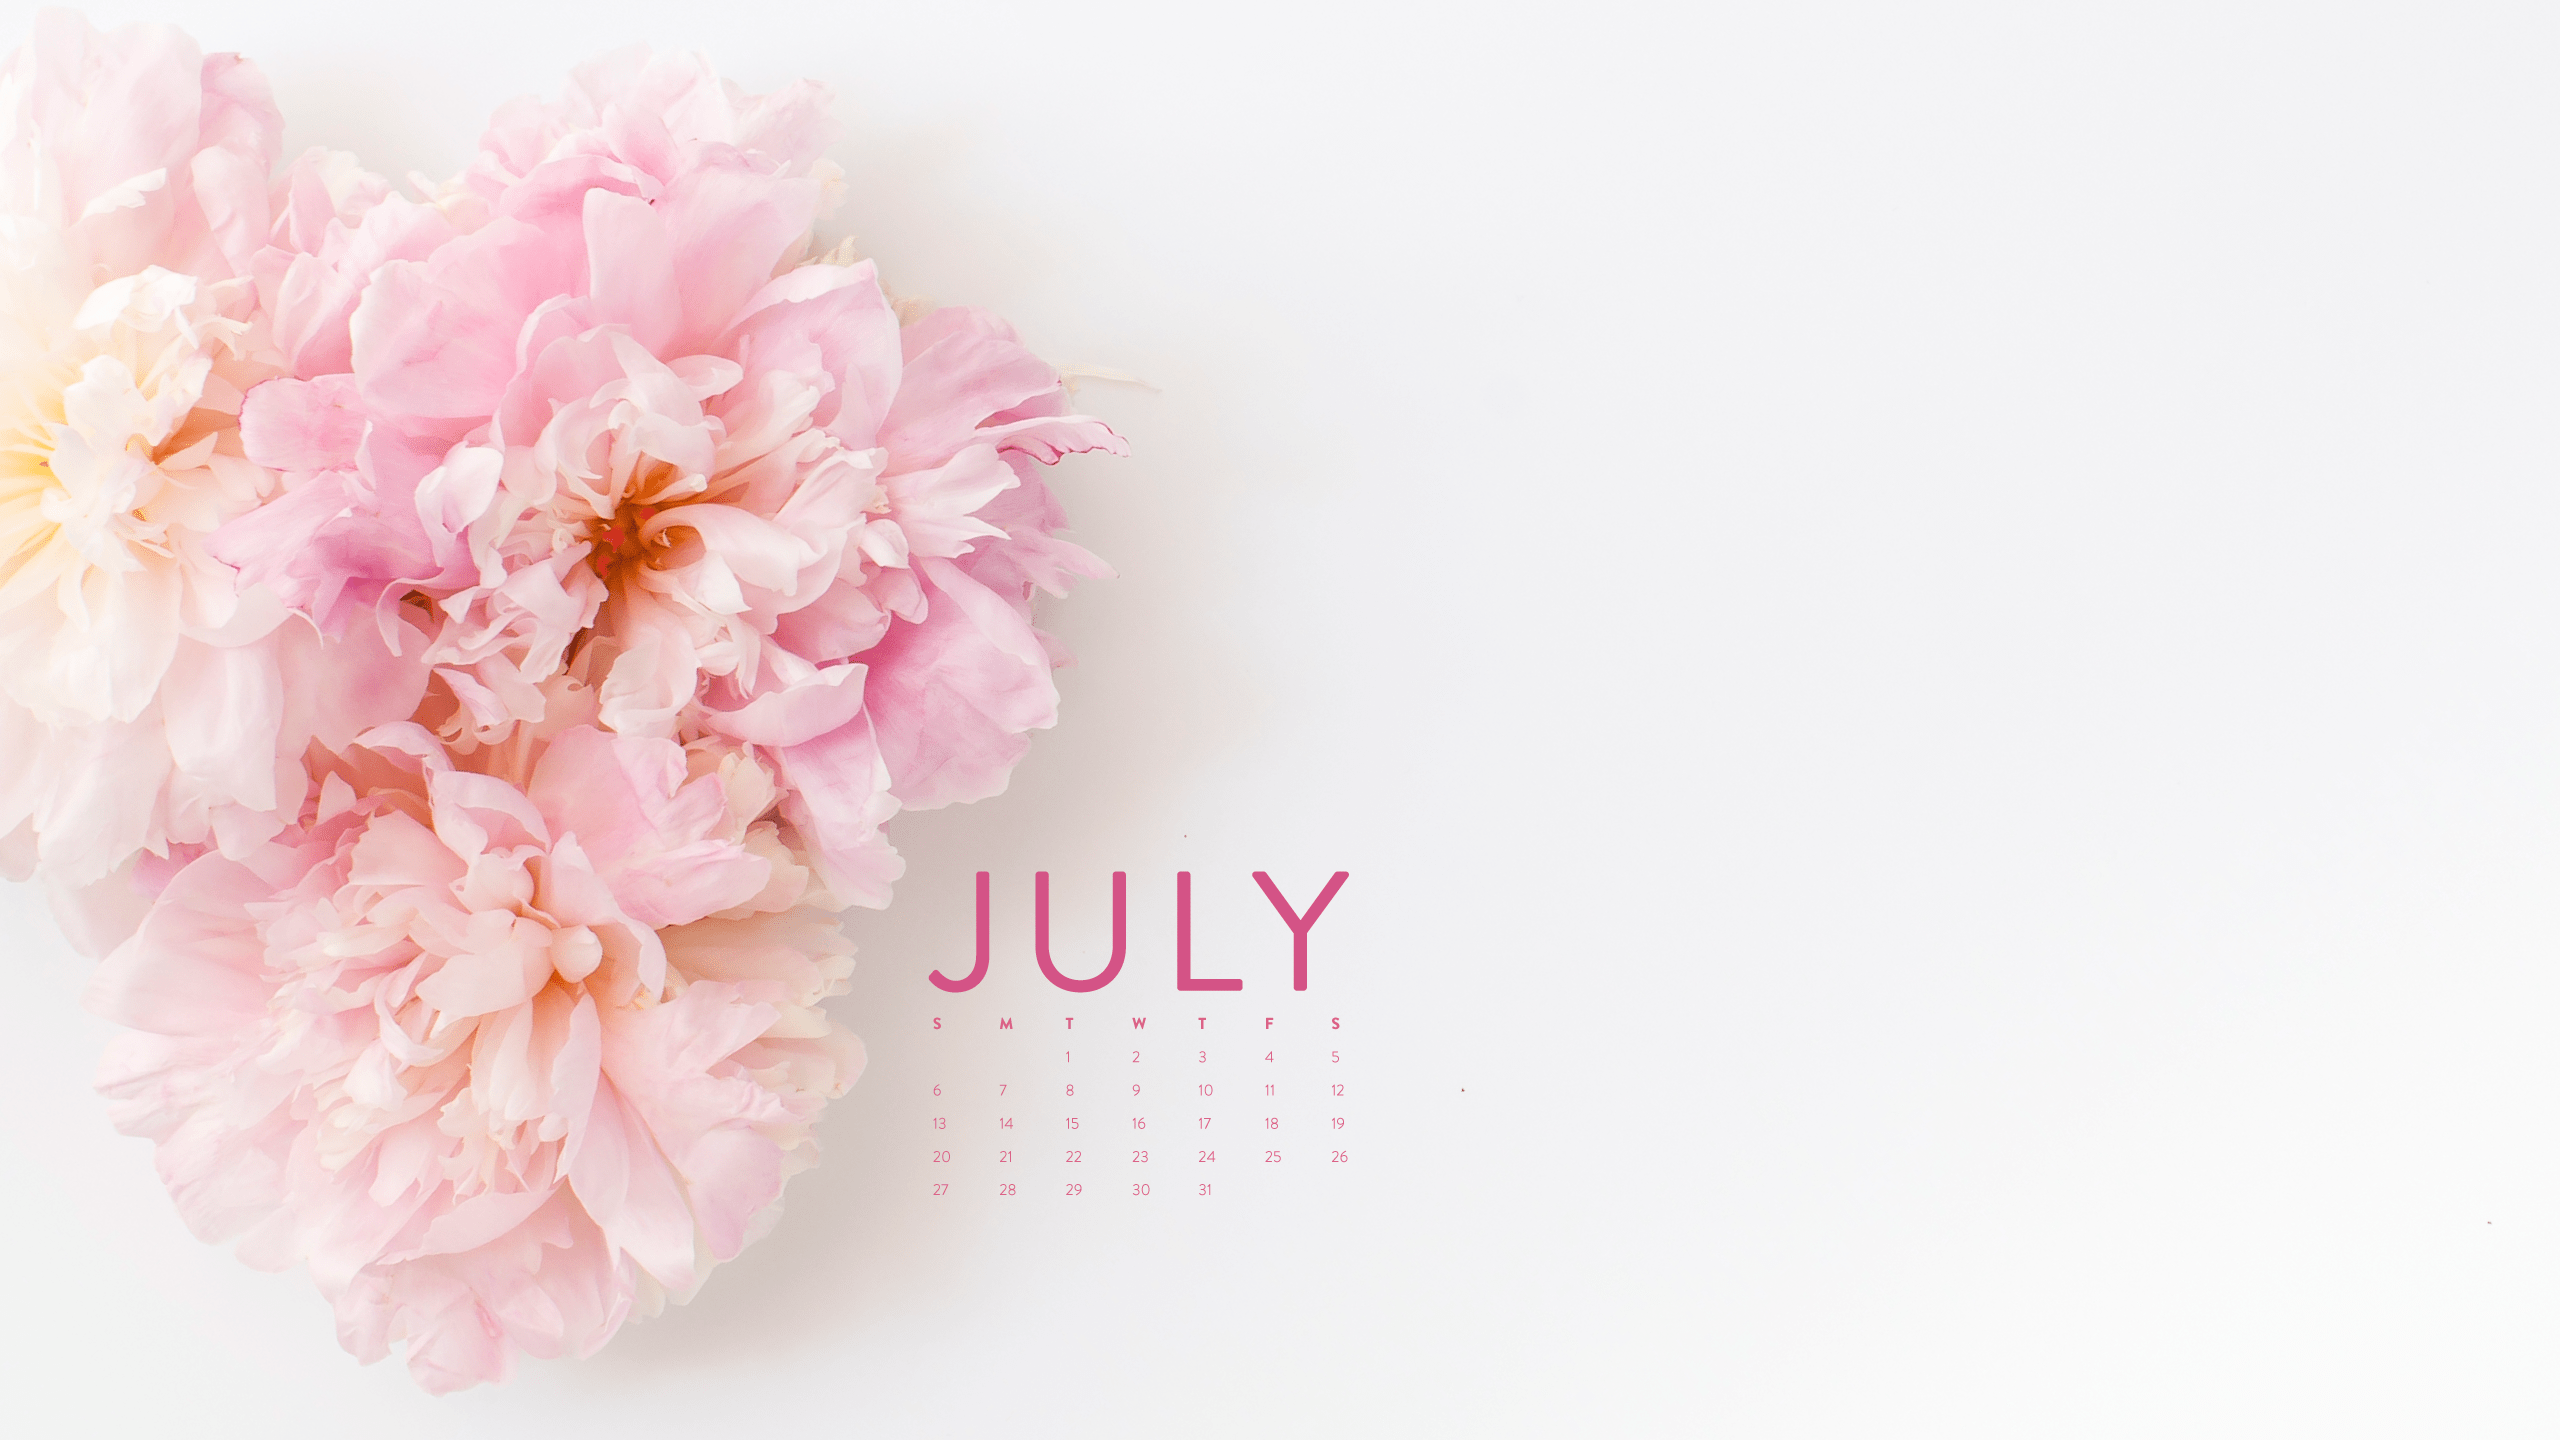 Finding Inspiration In The Simple Things July 2020 Wallpapers Edition   Smashing Magazine